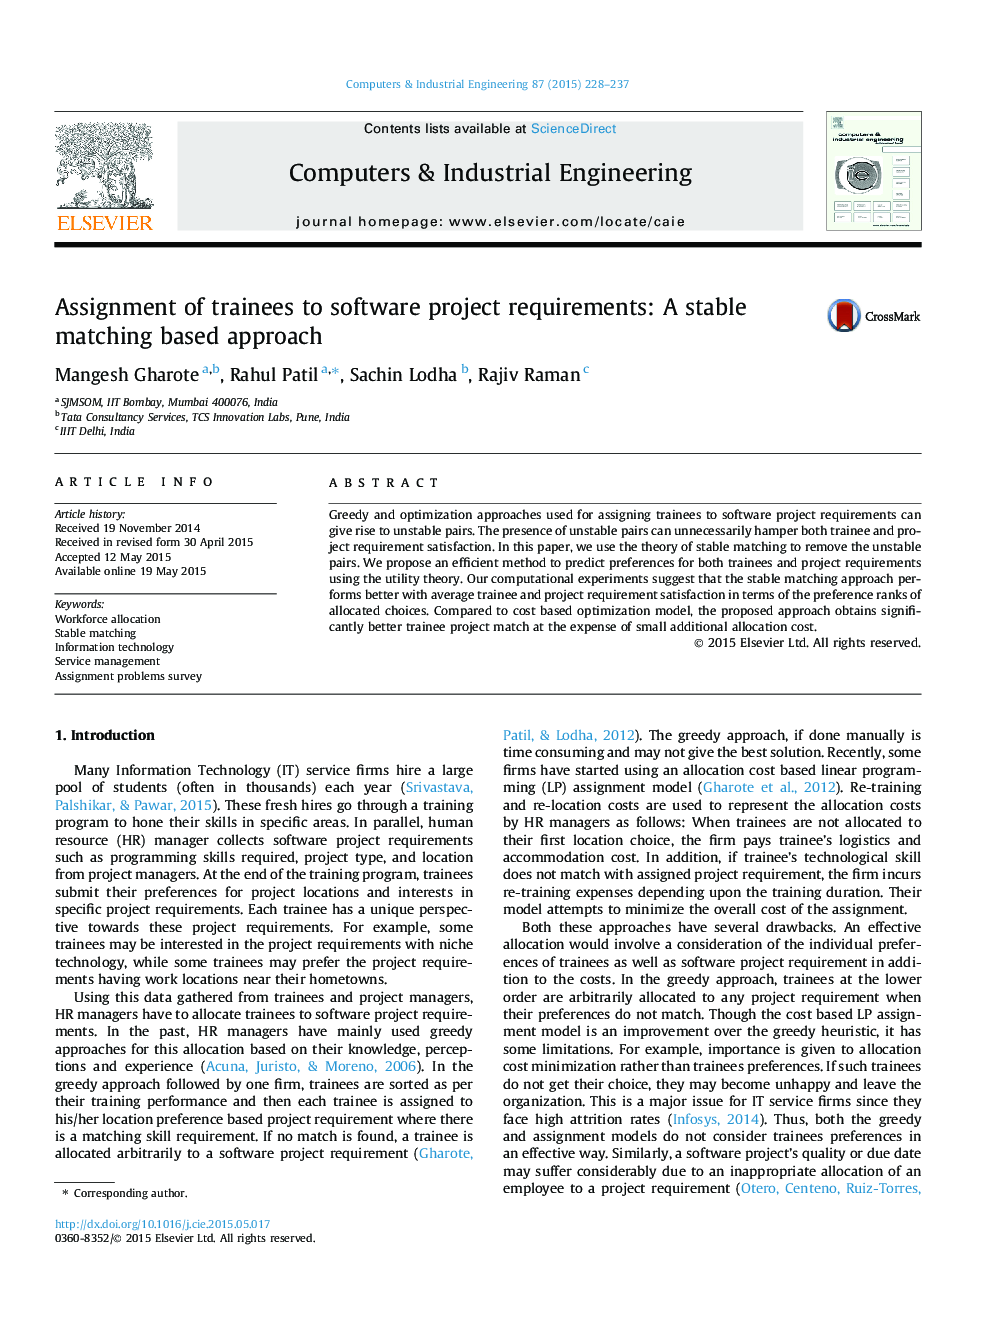 Assignment of trainees to software project requirements: A stable matching based approach